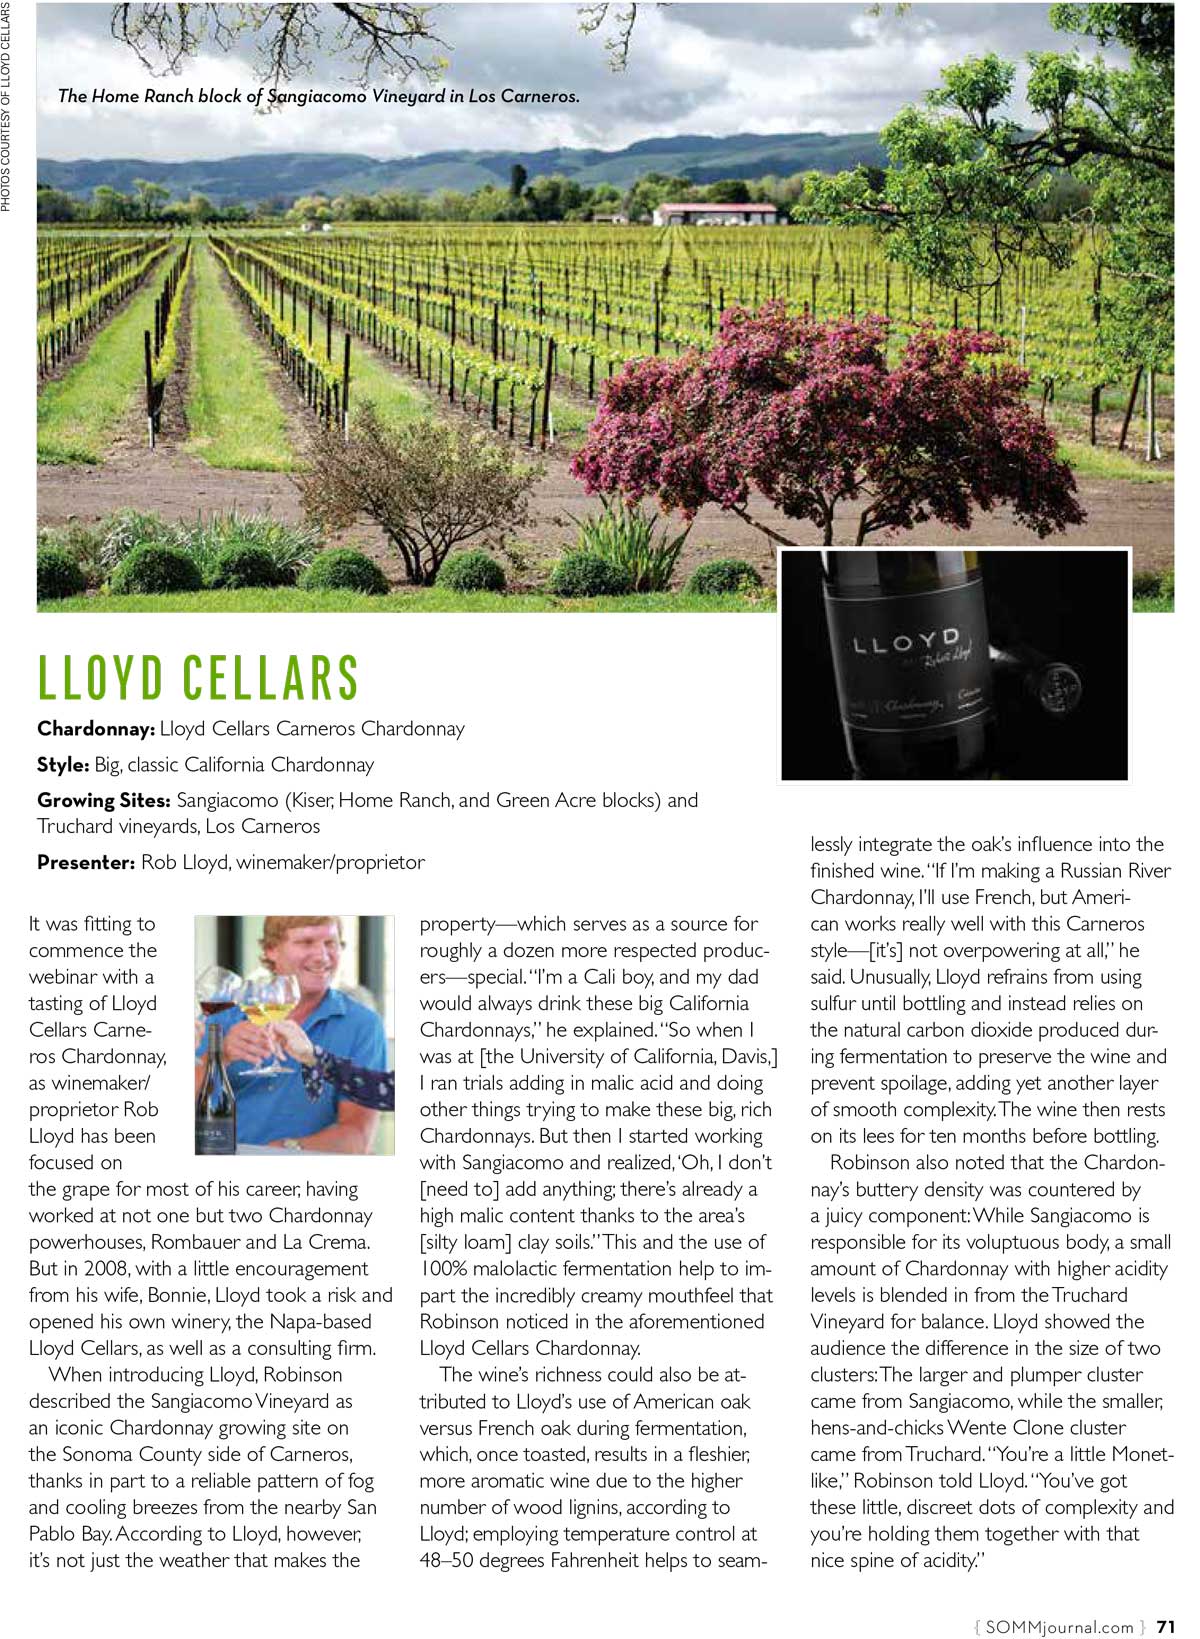 Somm Journal article page